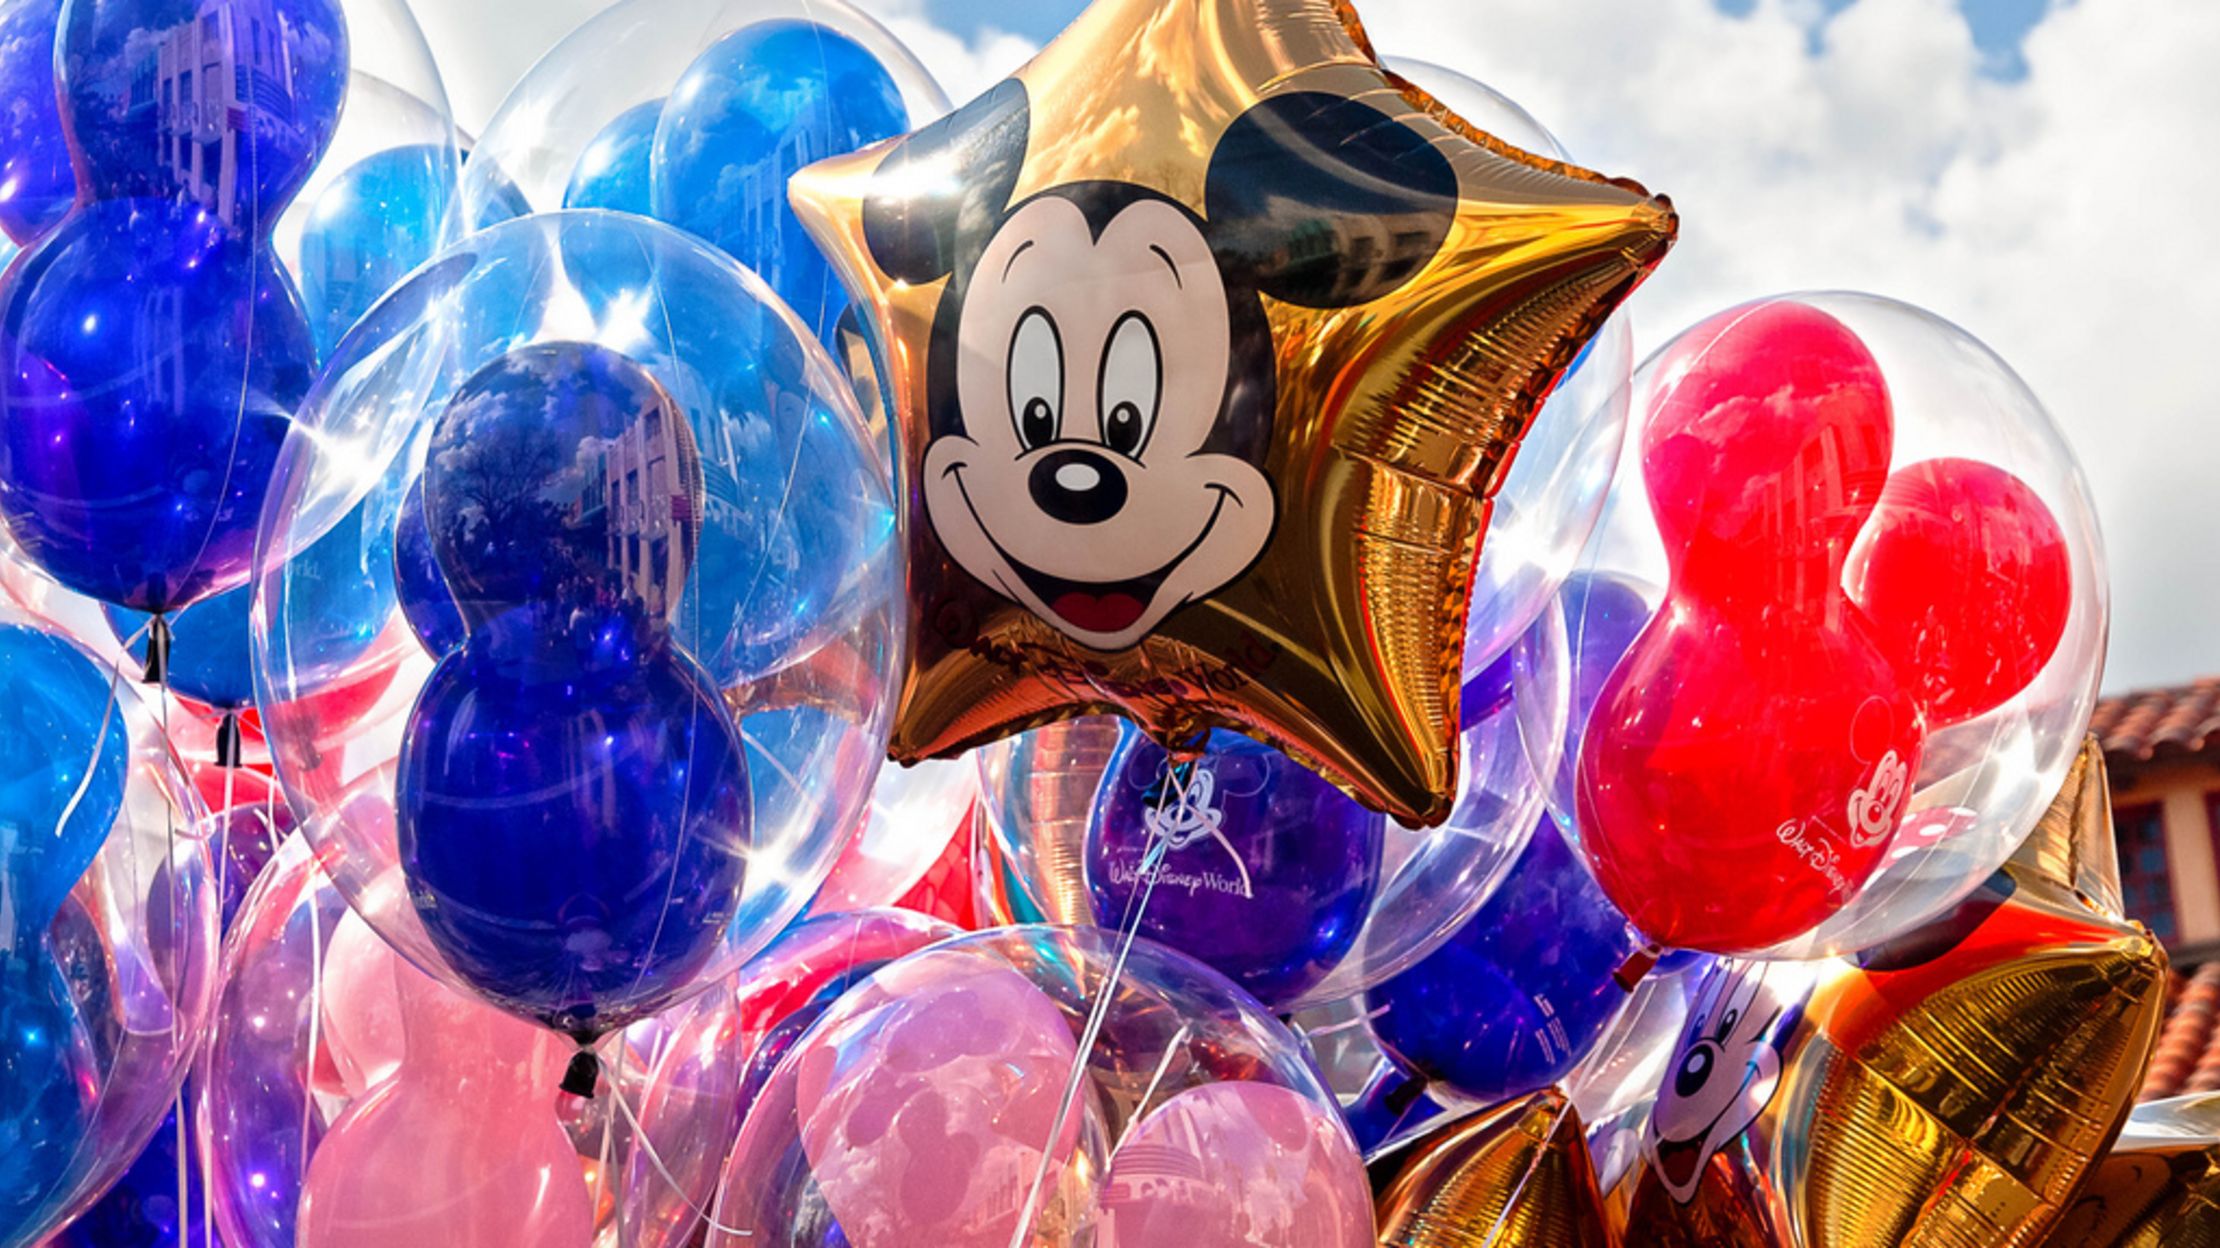 11-adorable-facts-about-mickey-mouse-mental-floss